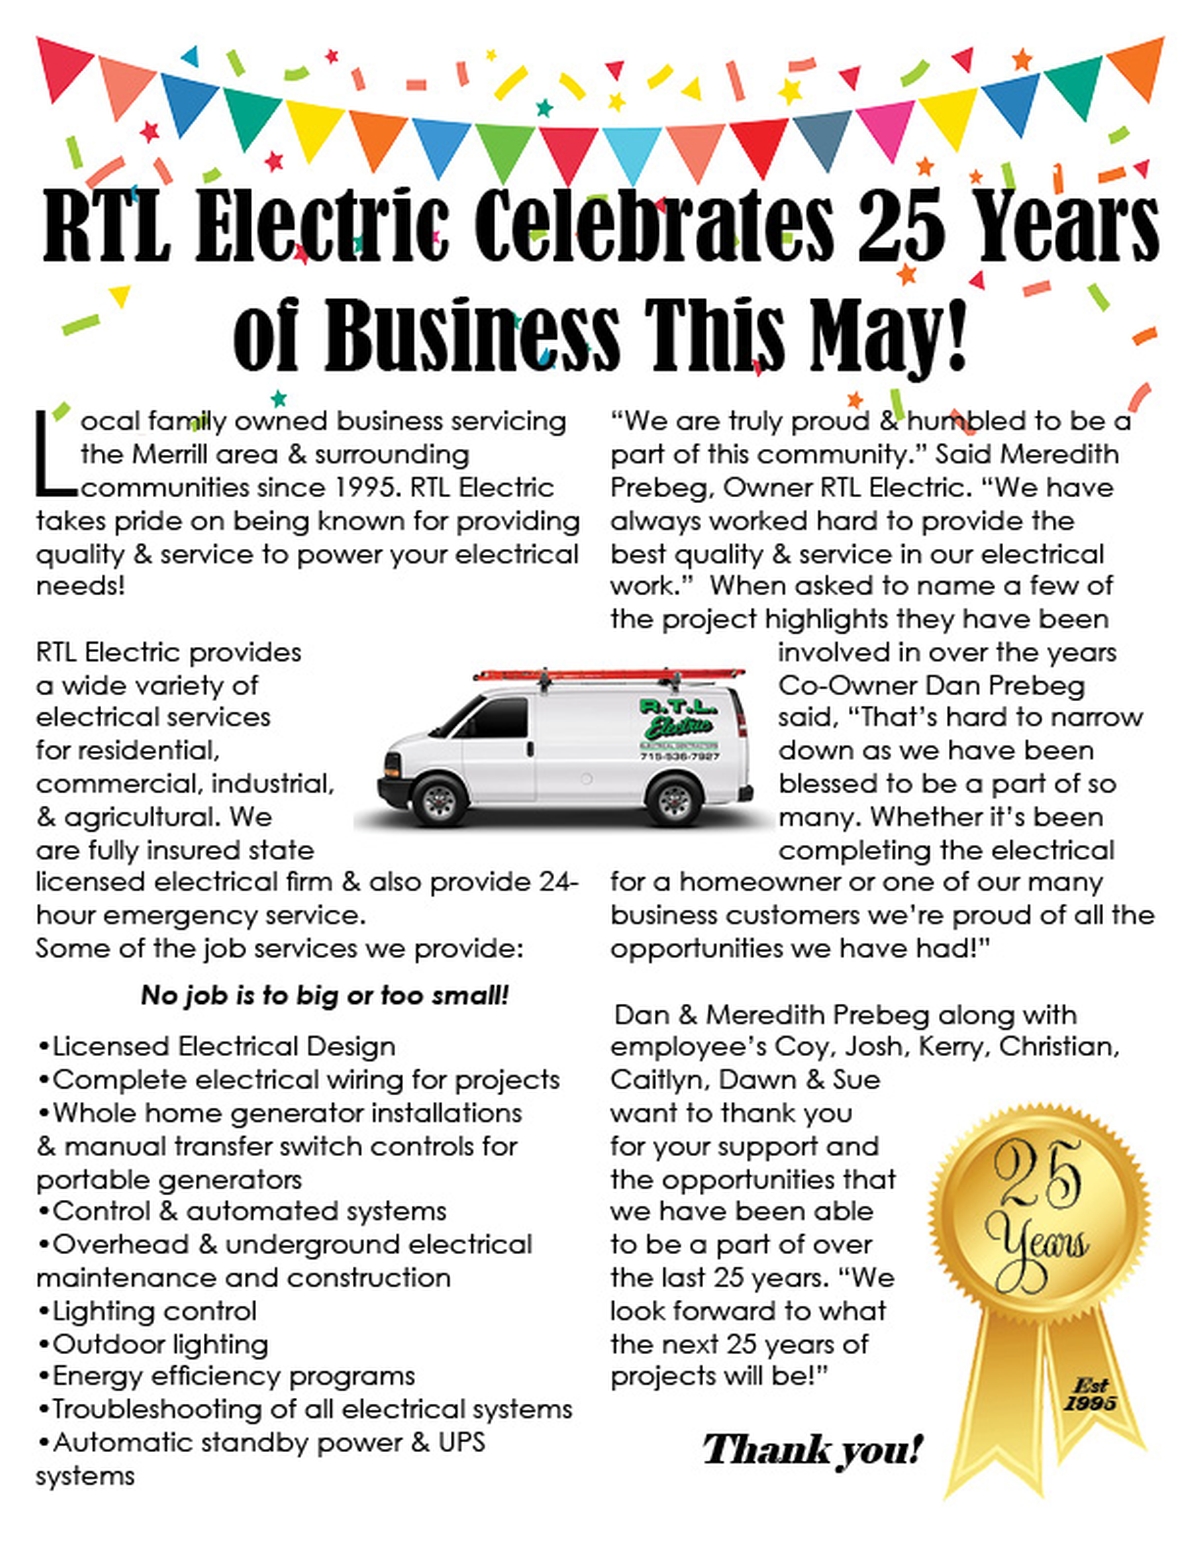 RTL Electric Turned 25 in May!!